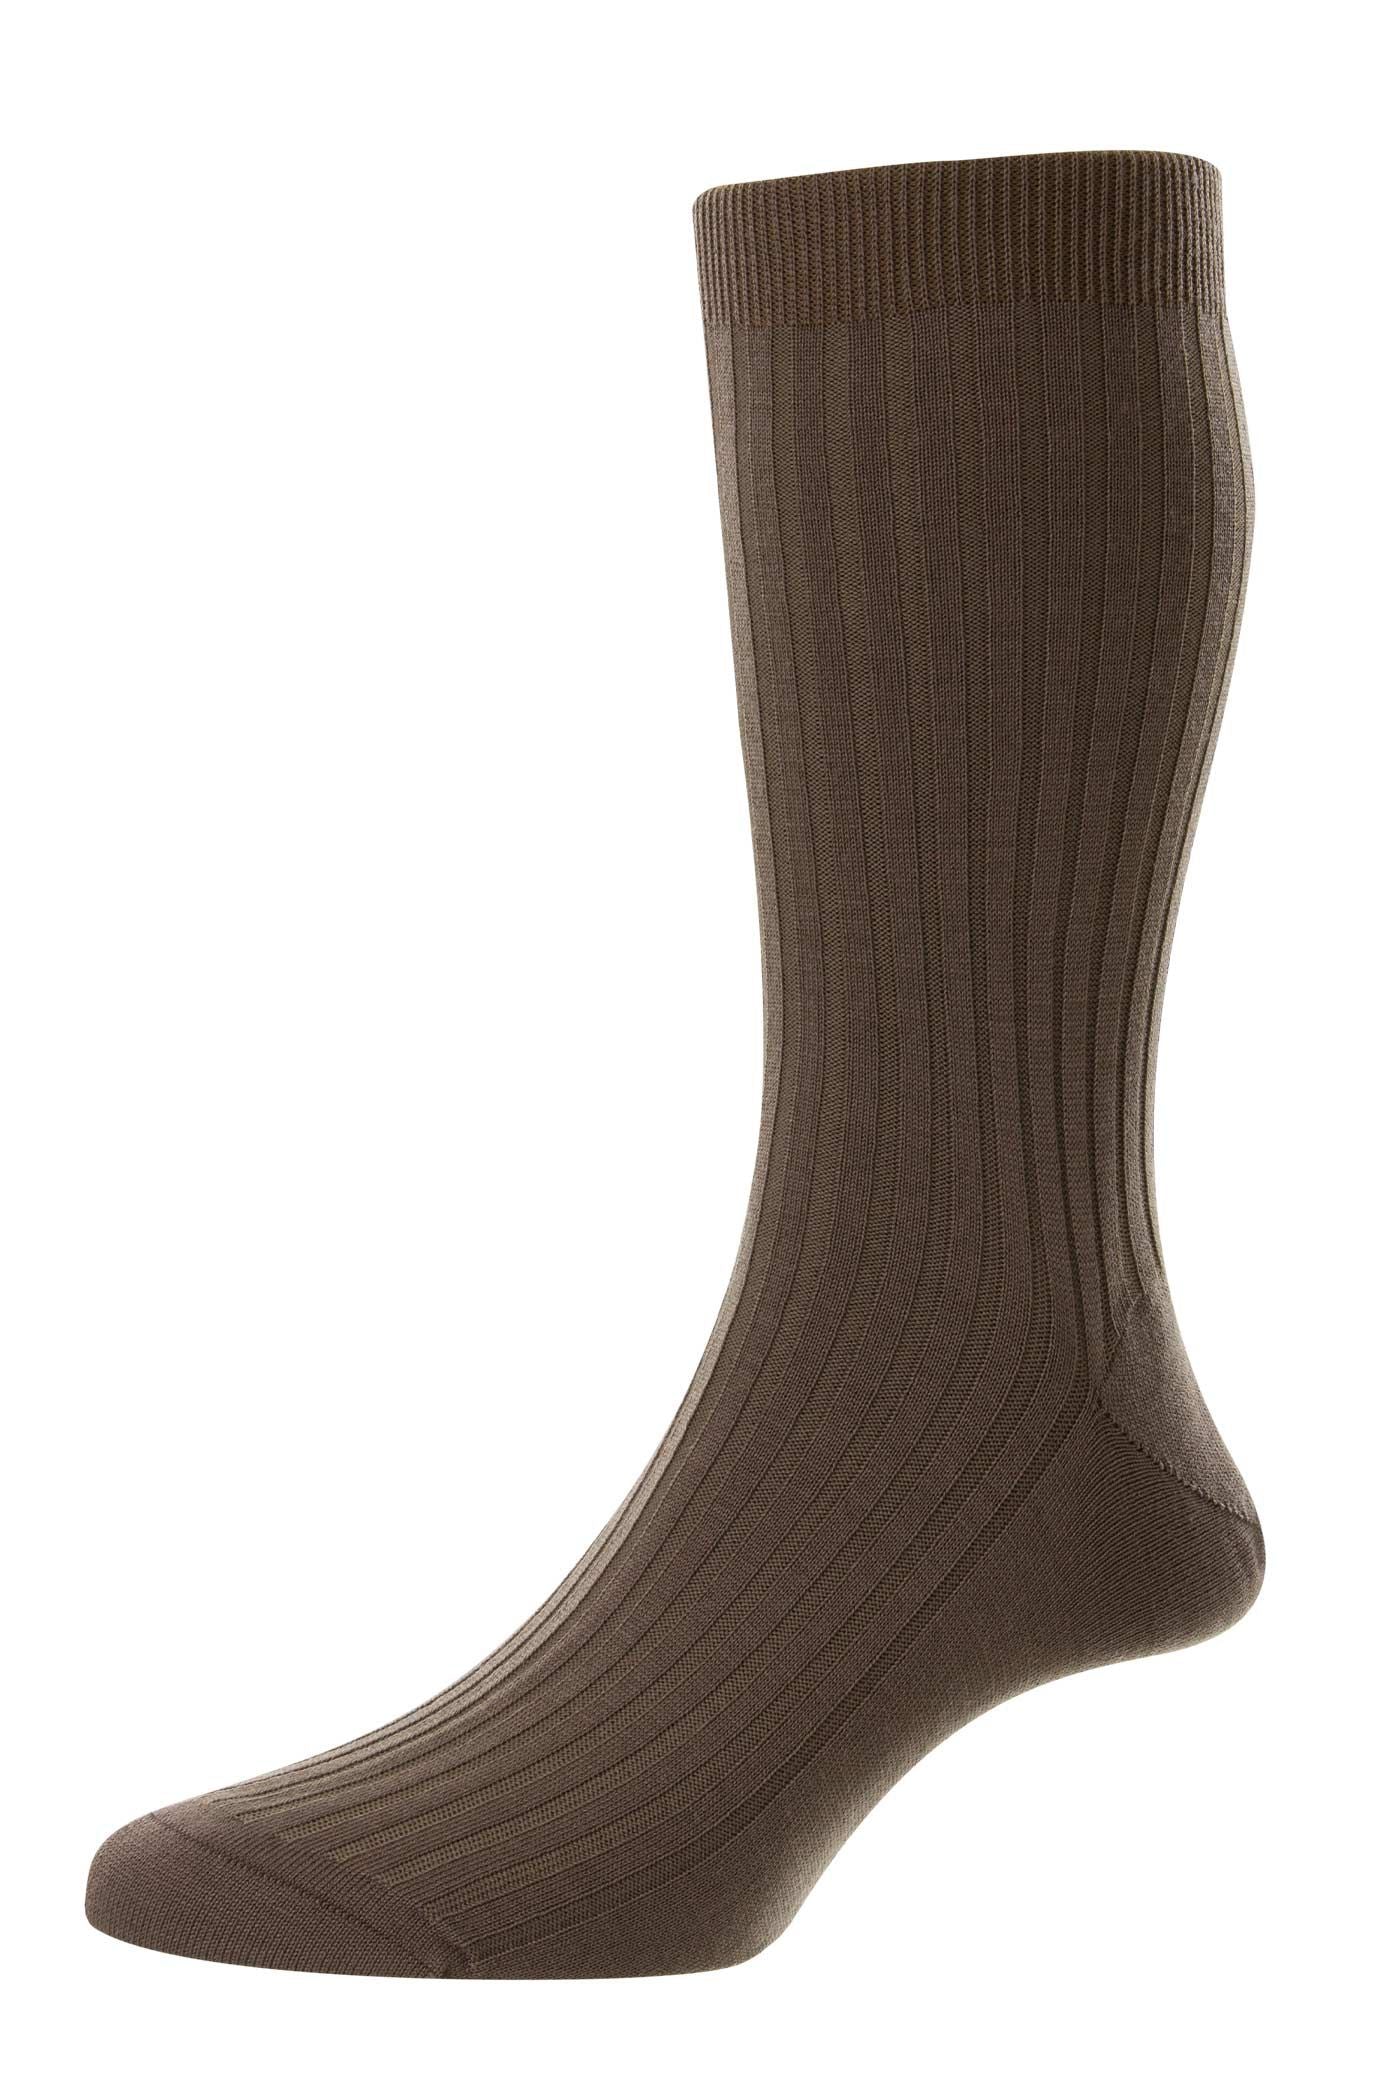 Rutherford in Brown Taupe by Pantherella